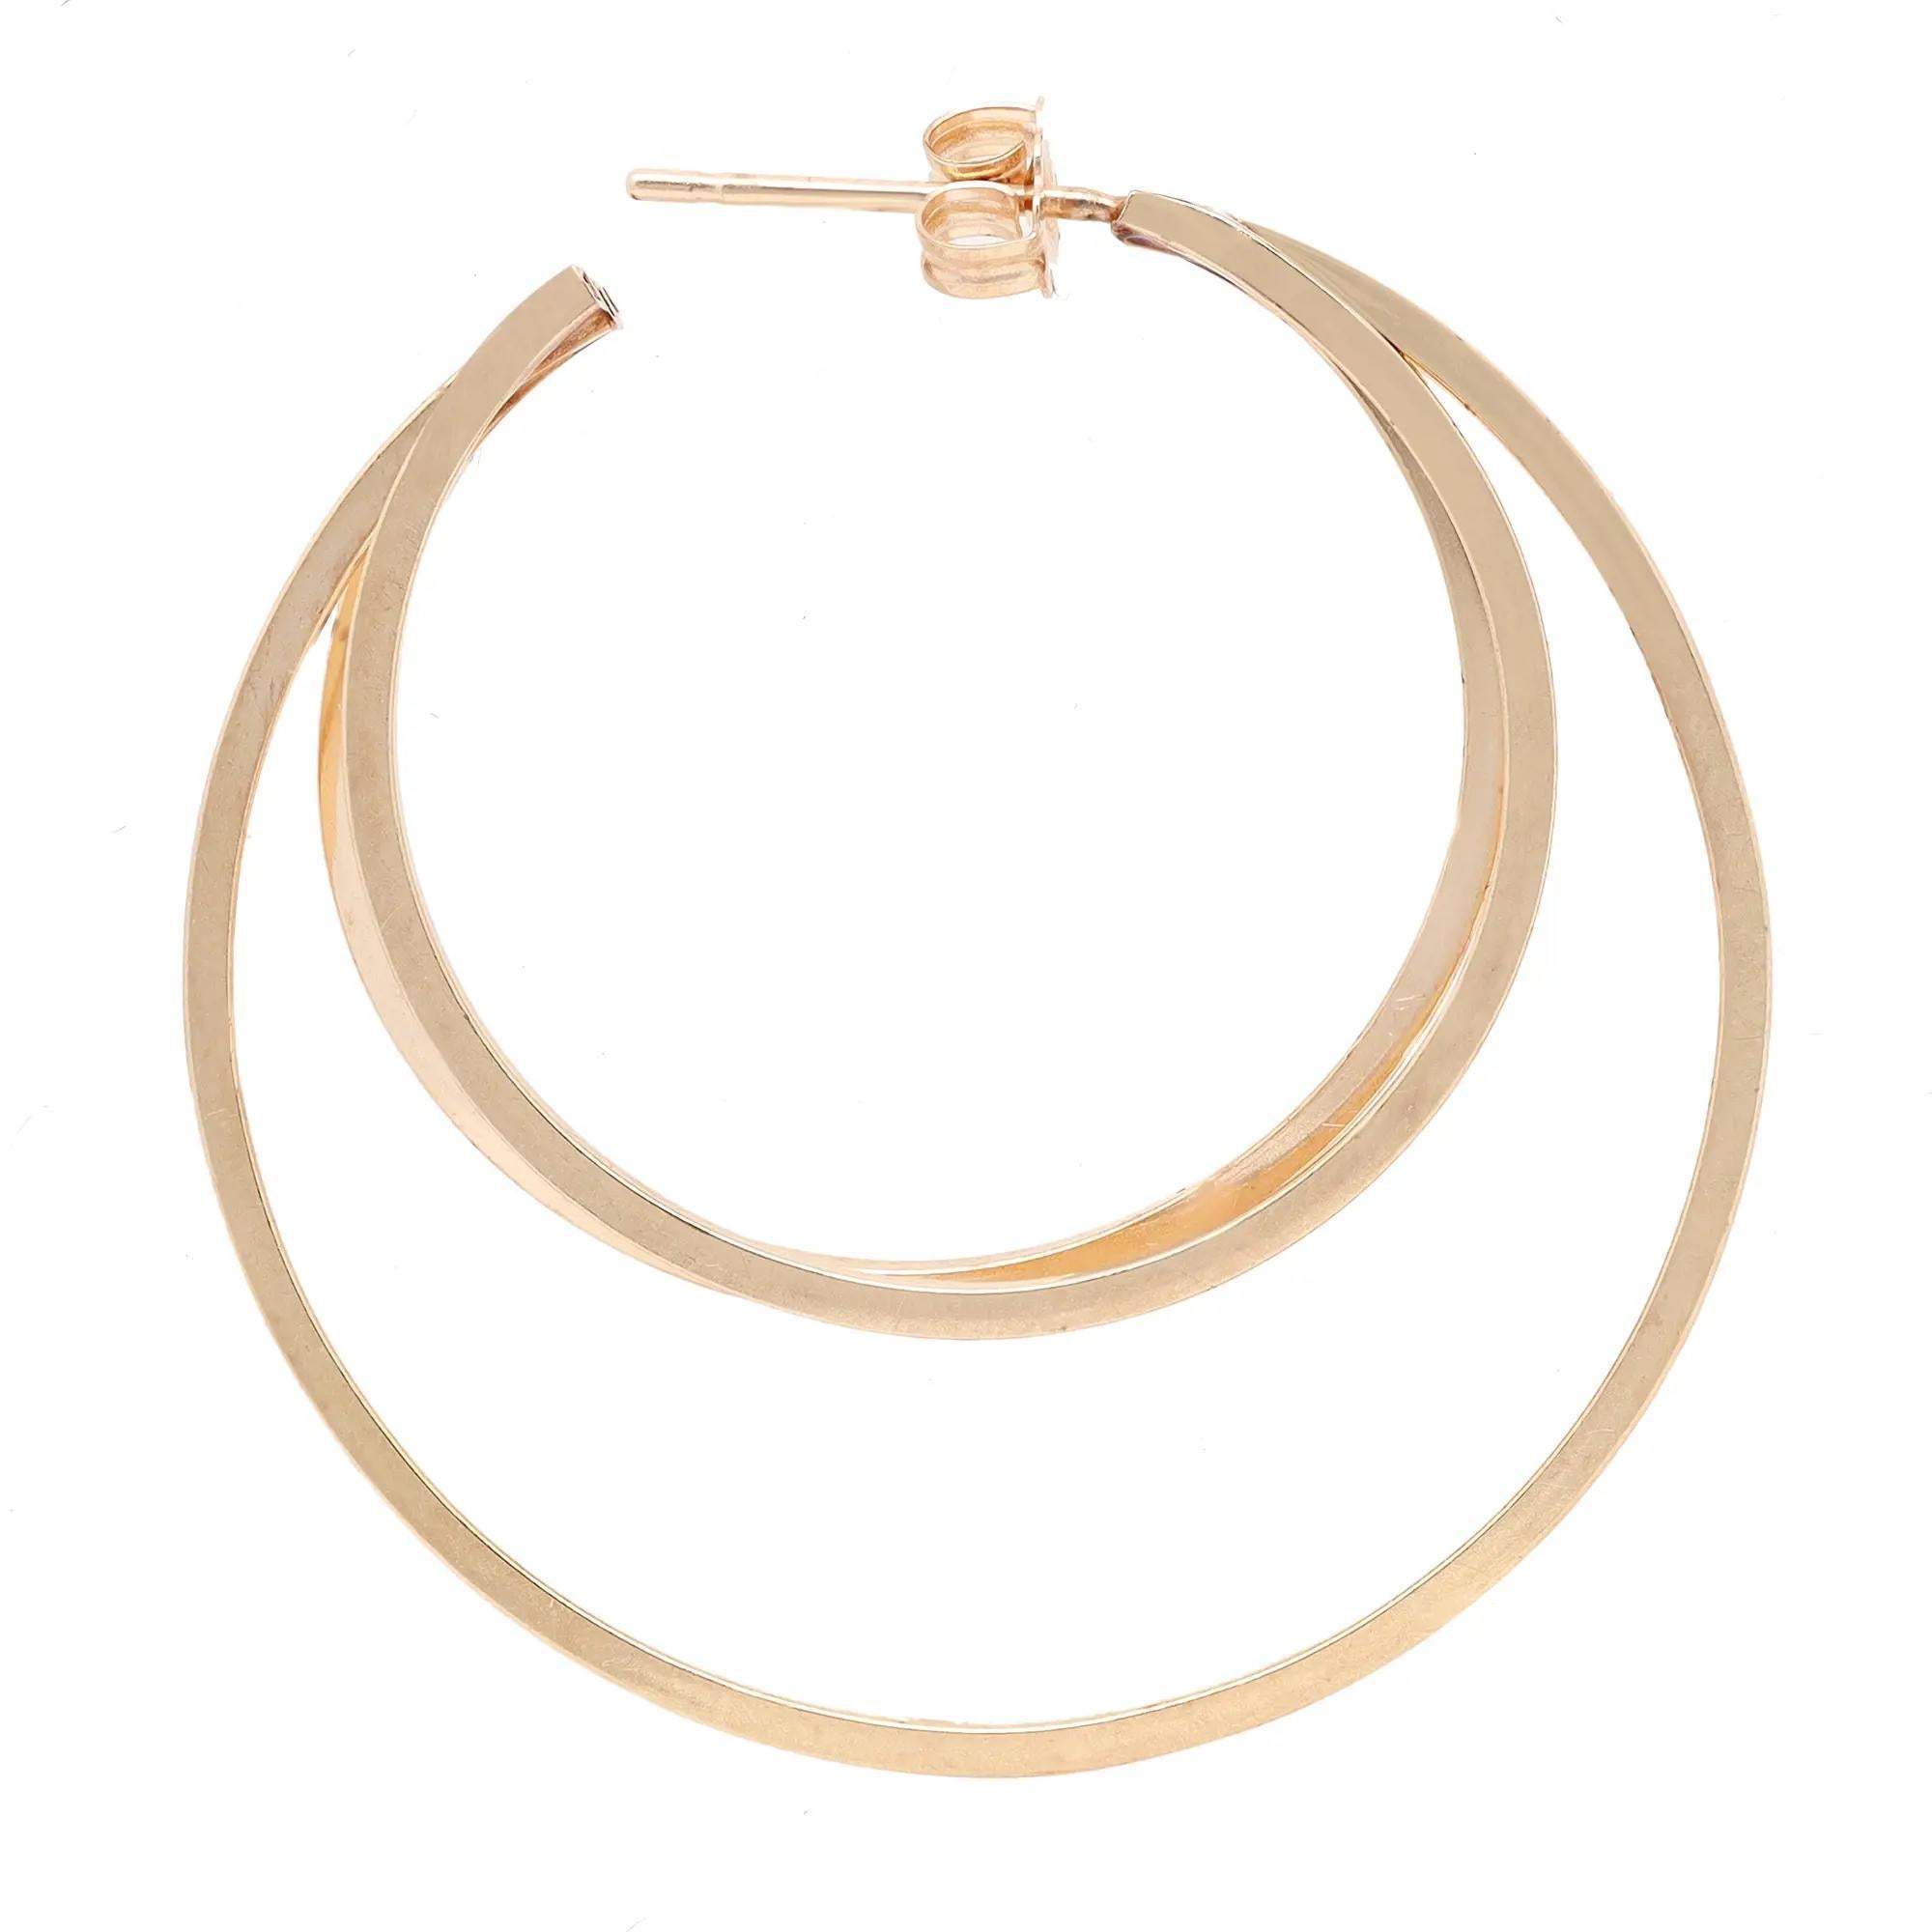 Elevate any attire with these dazzling three rows hoop earrings. Crafted in lustrous 14K yellow gold. Earring length: 1.5 inches. Total weight: 4.76 grams. Secured with push back closure. Comes with a presentable gift box.
